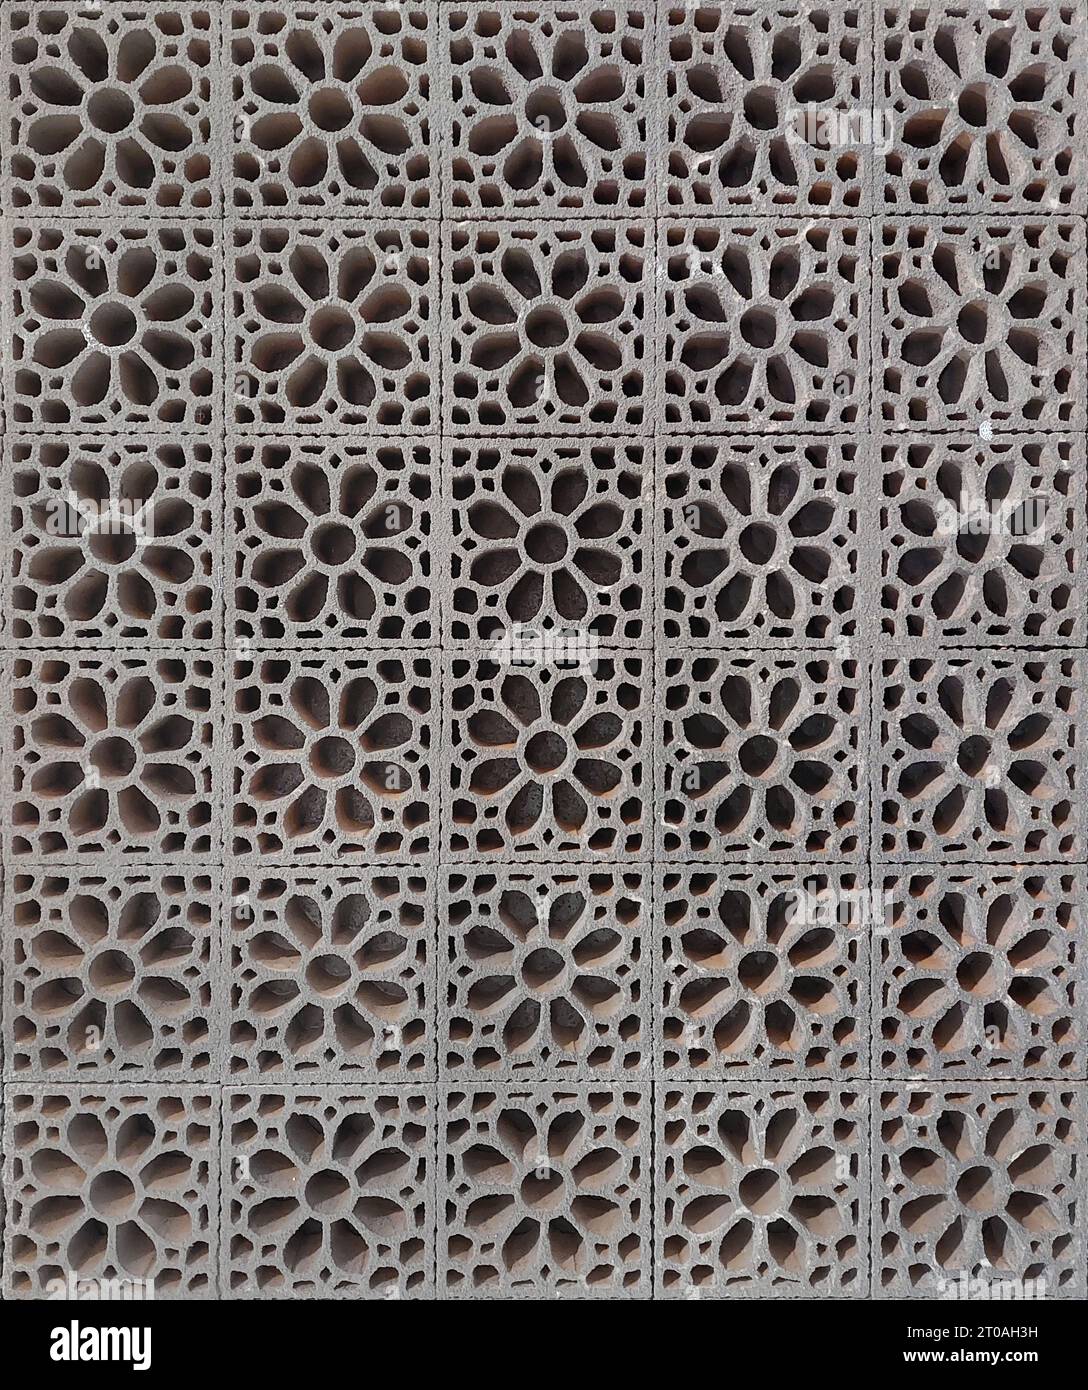 Close up pattern of moulded clay or ceramic latticework, or simply called as Roster, in flower pattern. Latticework is a moulded or cutout pattern. Stock Photo